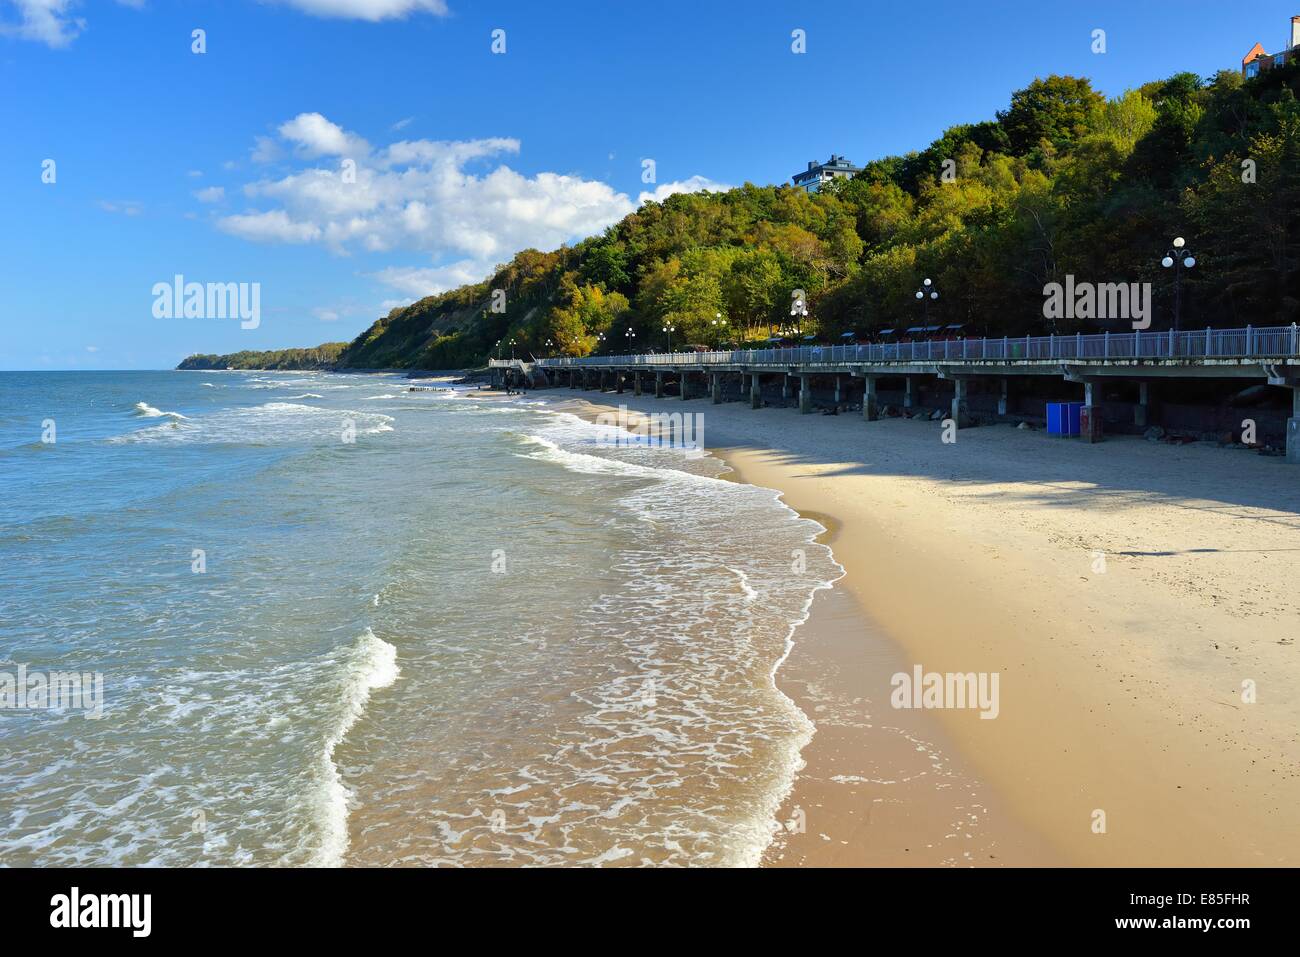 Resort town in the Kaliningrad region of the Russian Federation located on the shores of the Baltic Sea Stock Photo